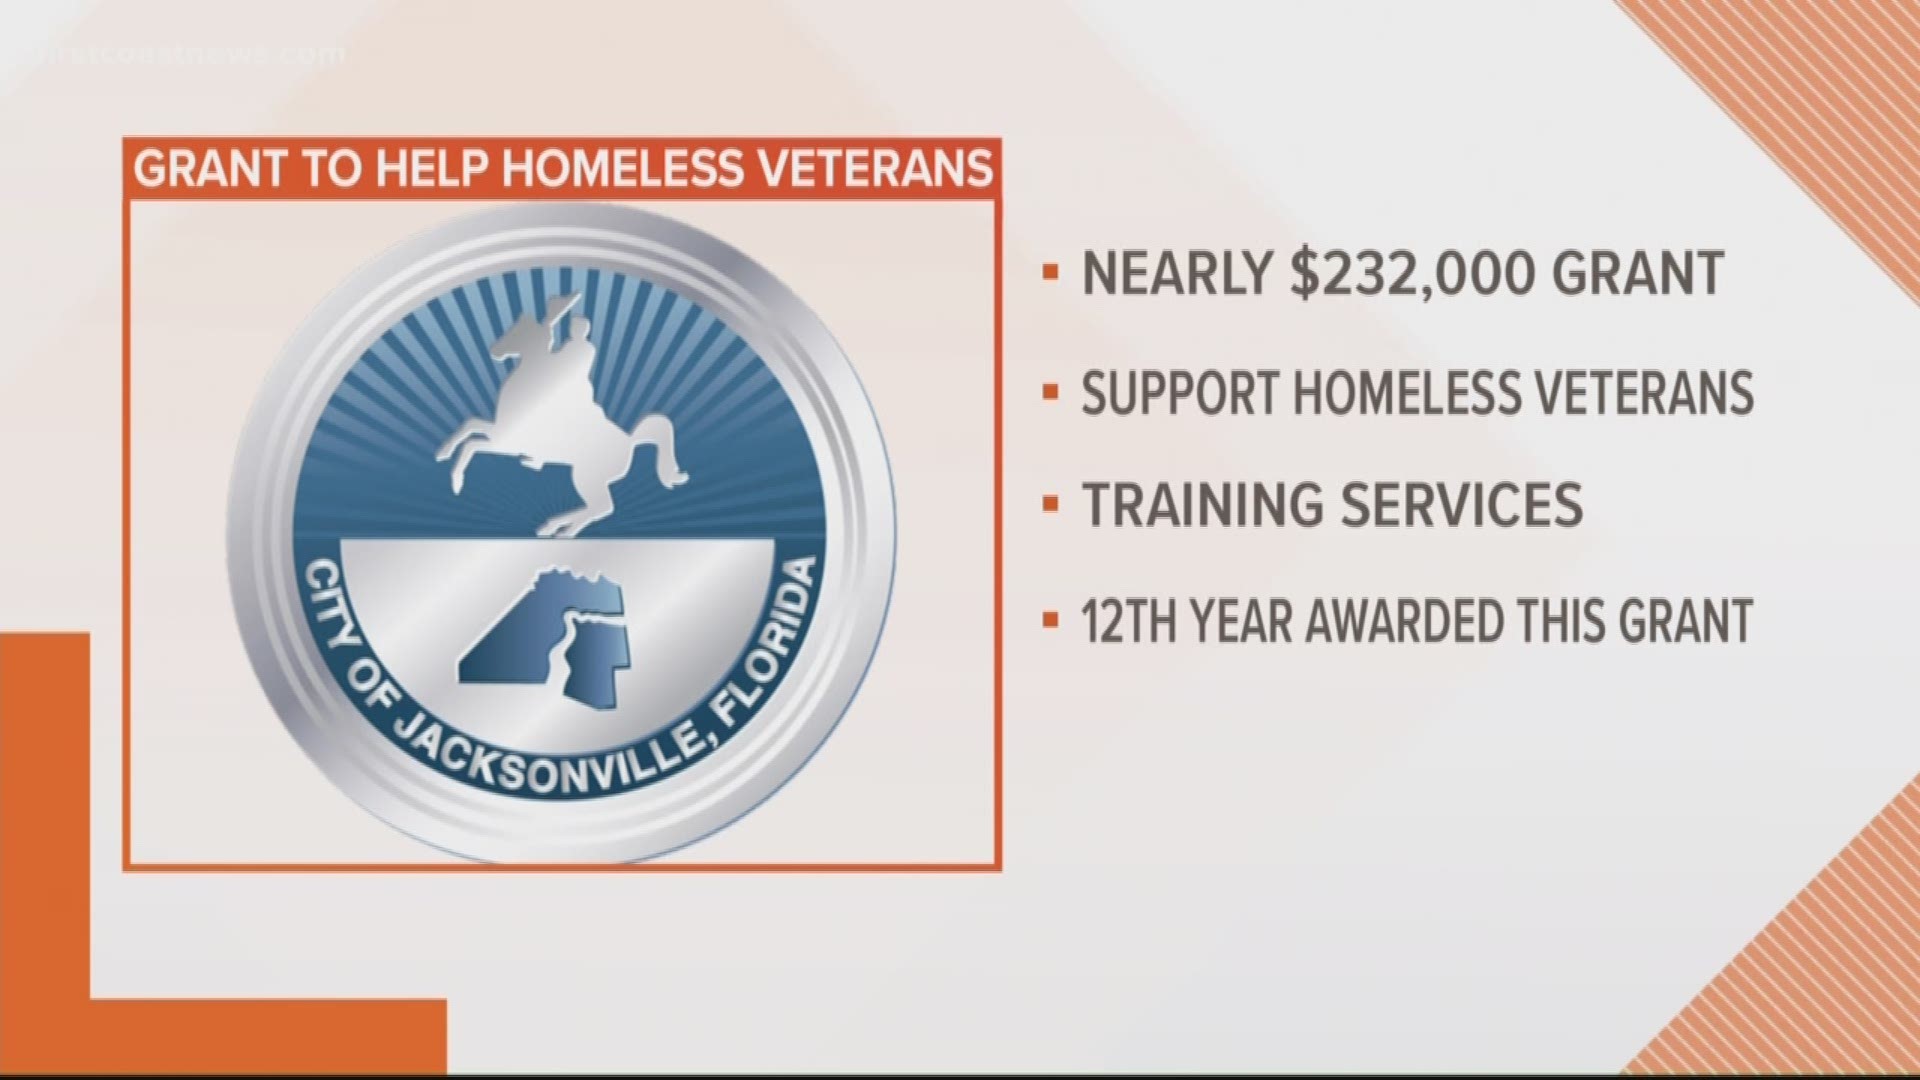 The grant, which totaled to $231,750, will help the Homeless Veteran's Reintegration Program (HVRP). The program provides homeless veterans with training services needed to re-enter the workforce, such as career counseling, resume preparation services and support services like attaining interview clothing and work tools.